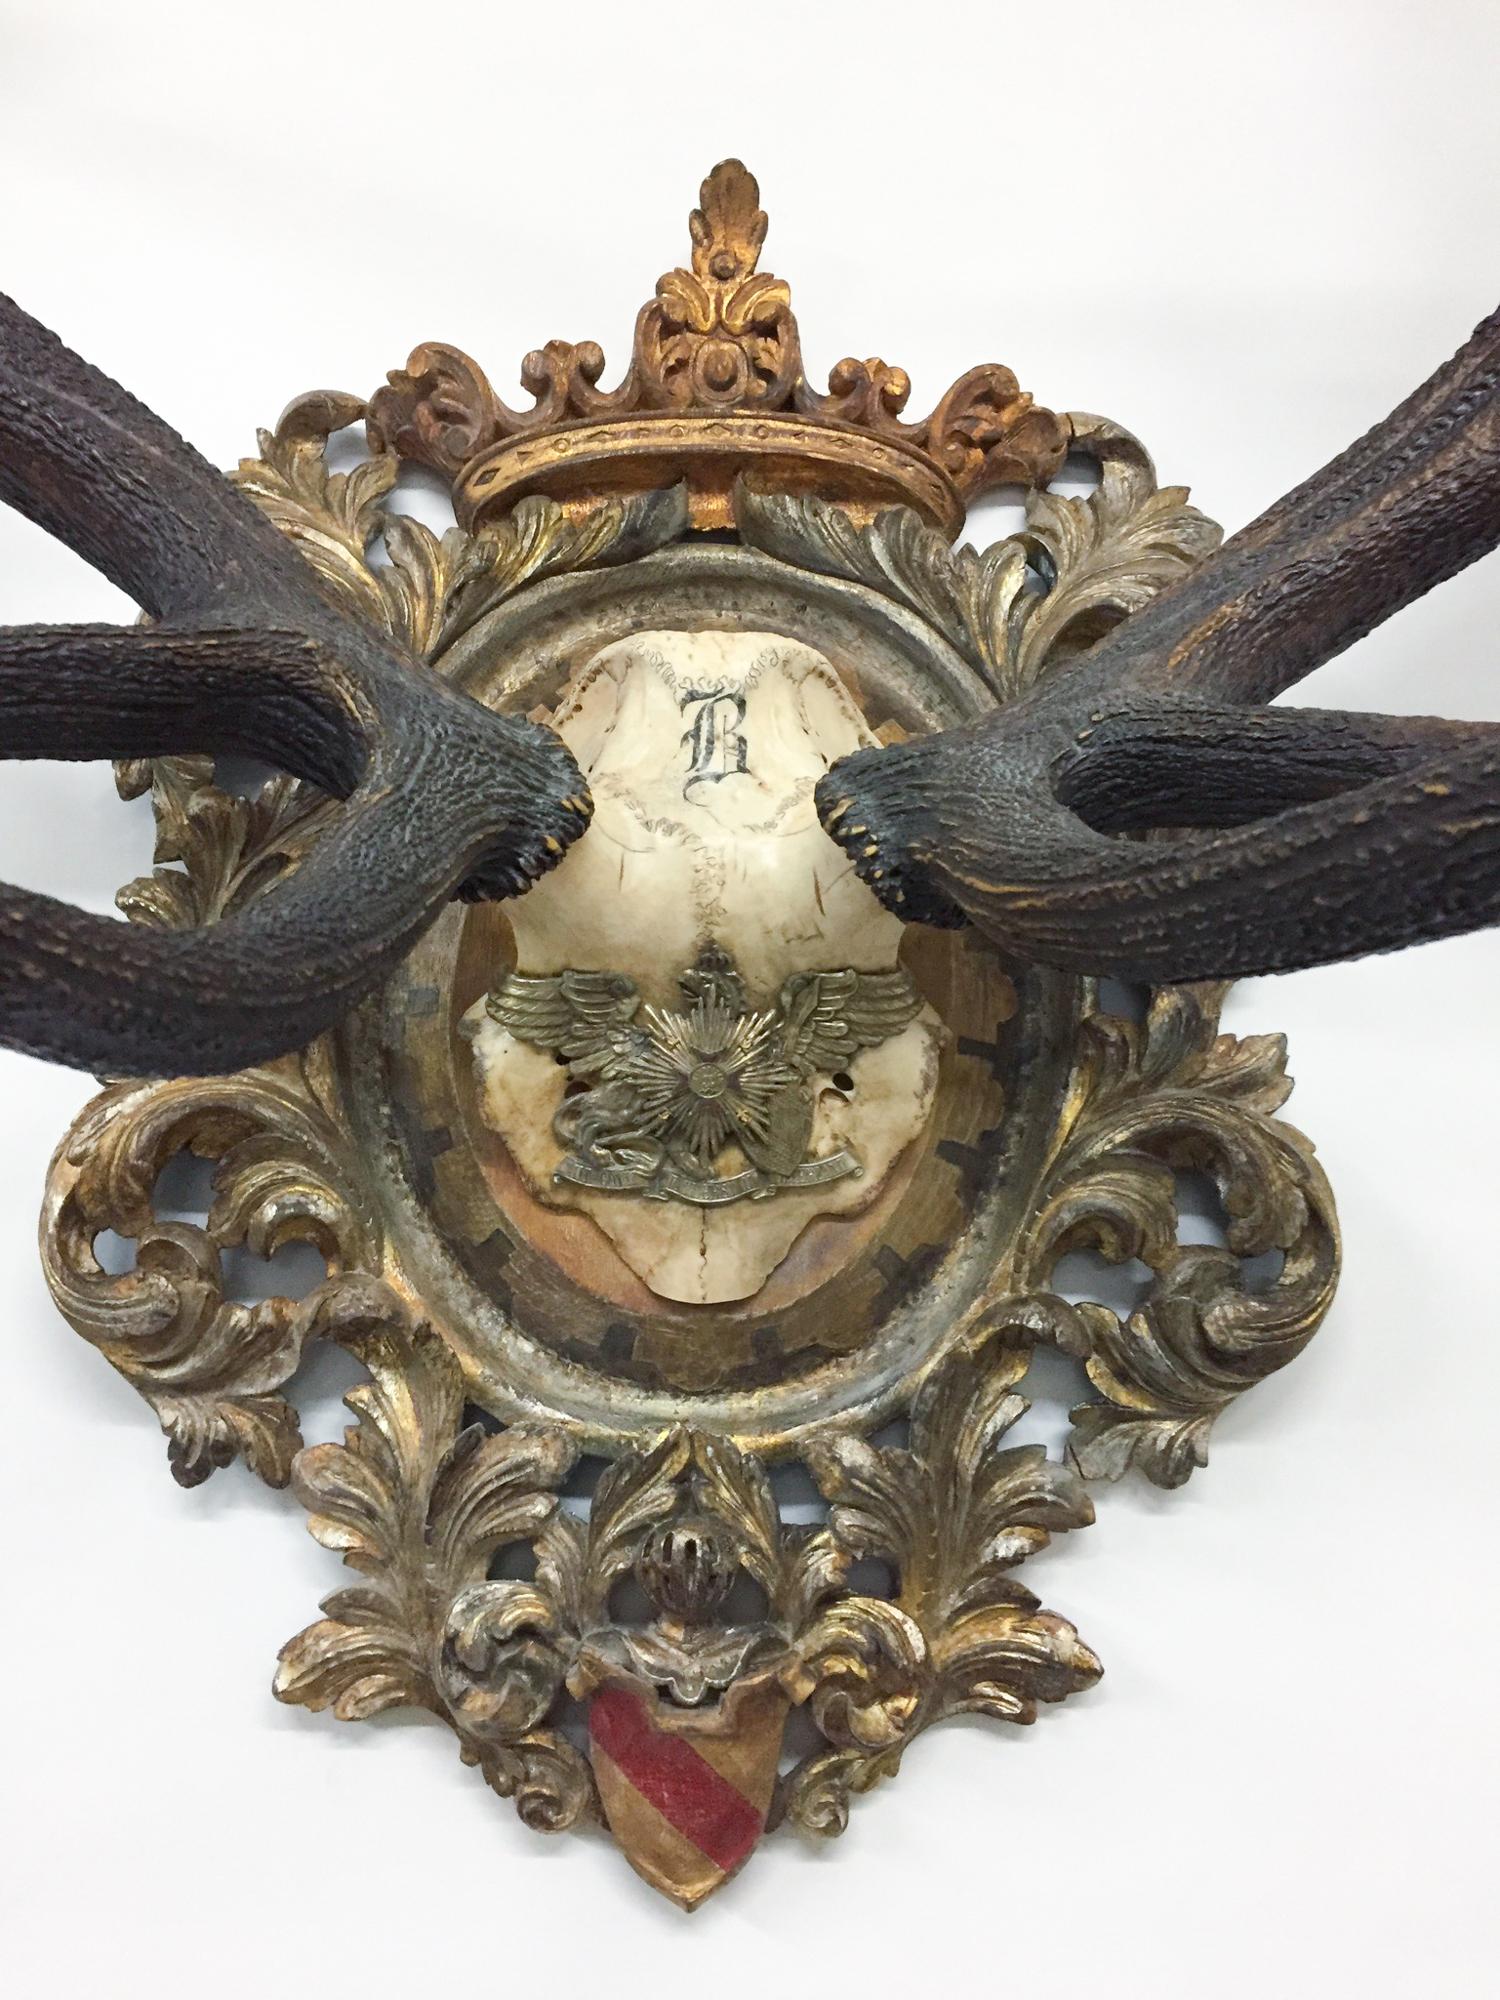 19th Century Antique Red Stag Trophy of The Grand Dukes of Baden on Ornate Gilt Plaque